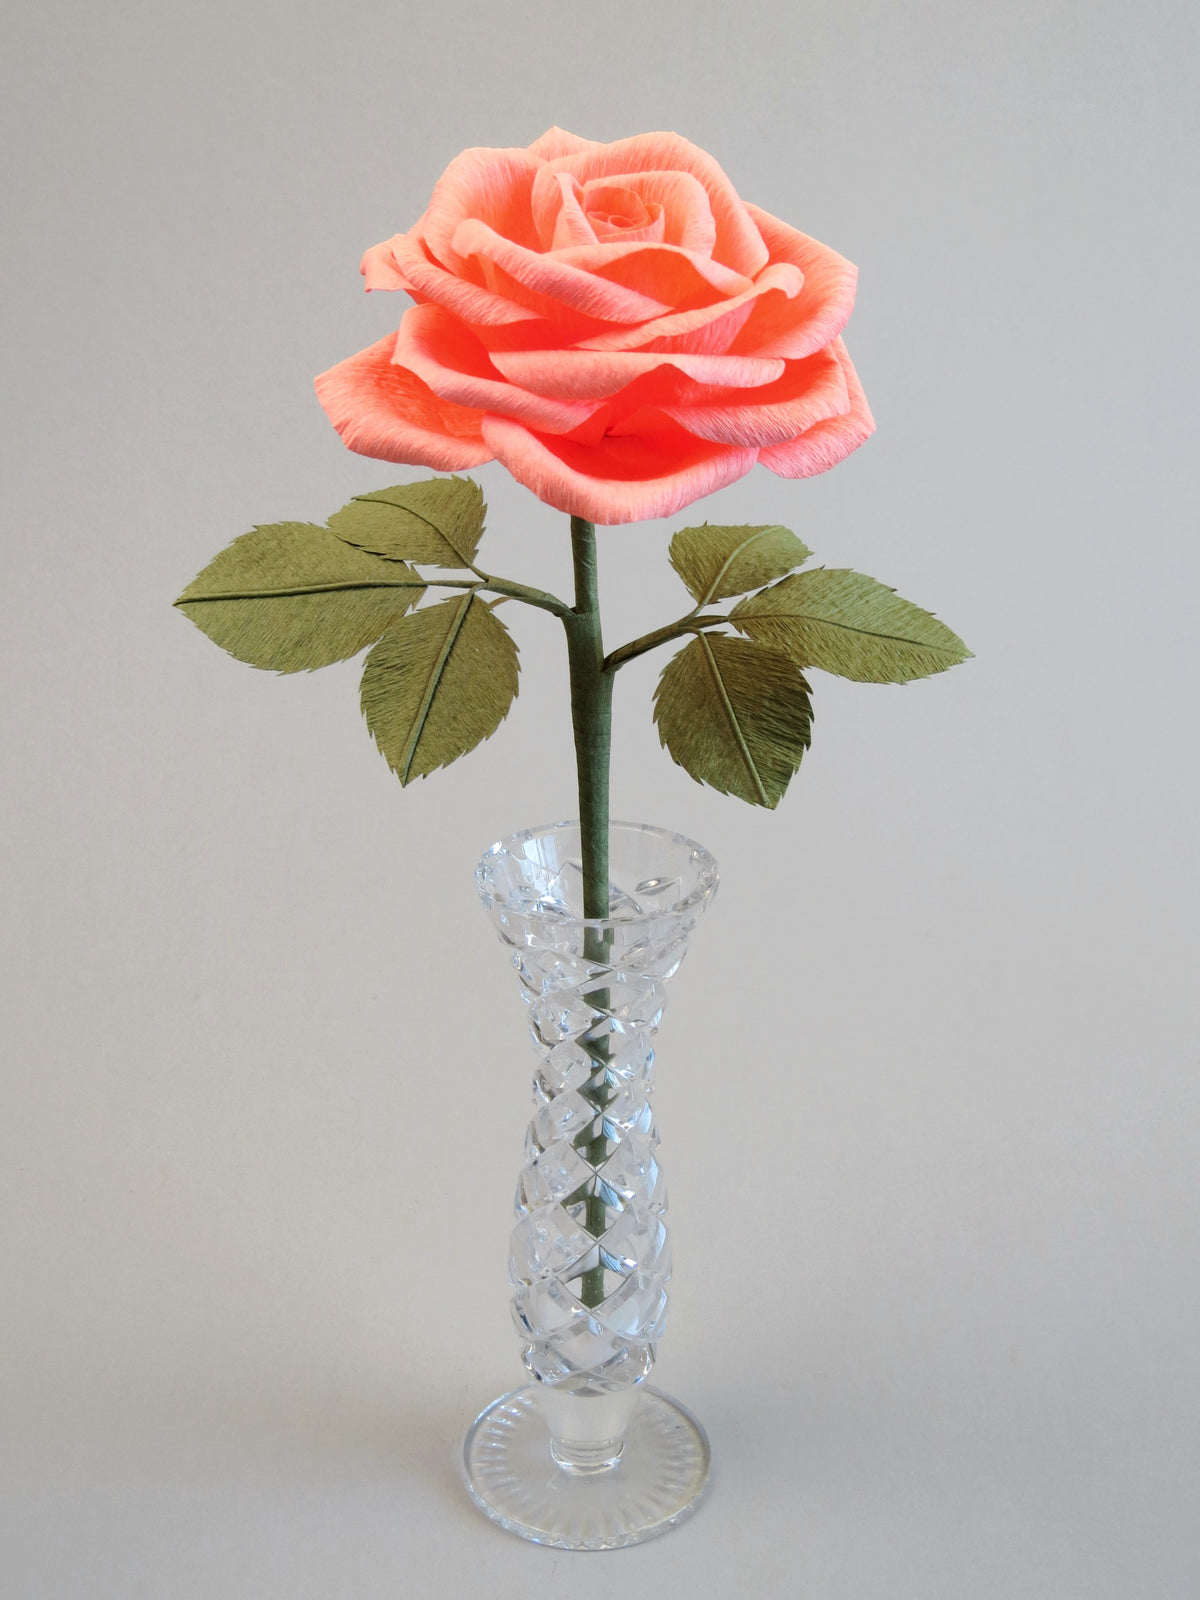 Coral pink crepe paper rose with six olive green leaves standing in a narrow glass vase set against a light grey background